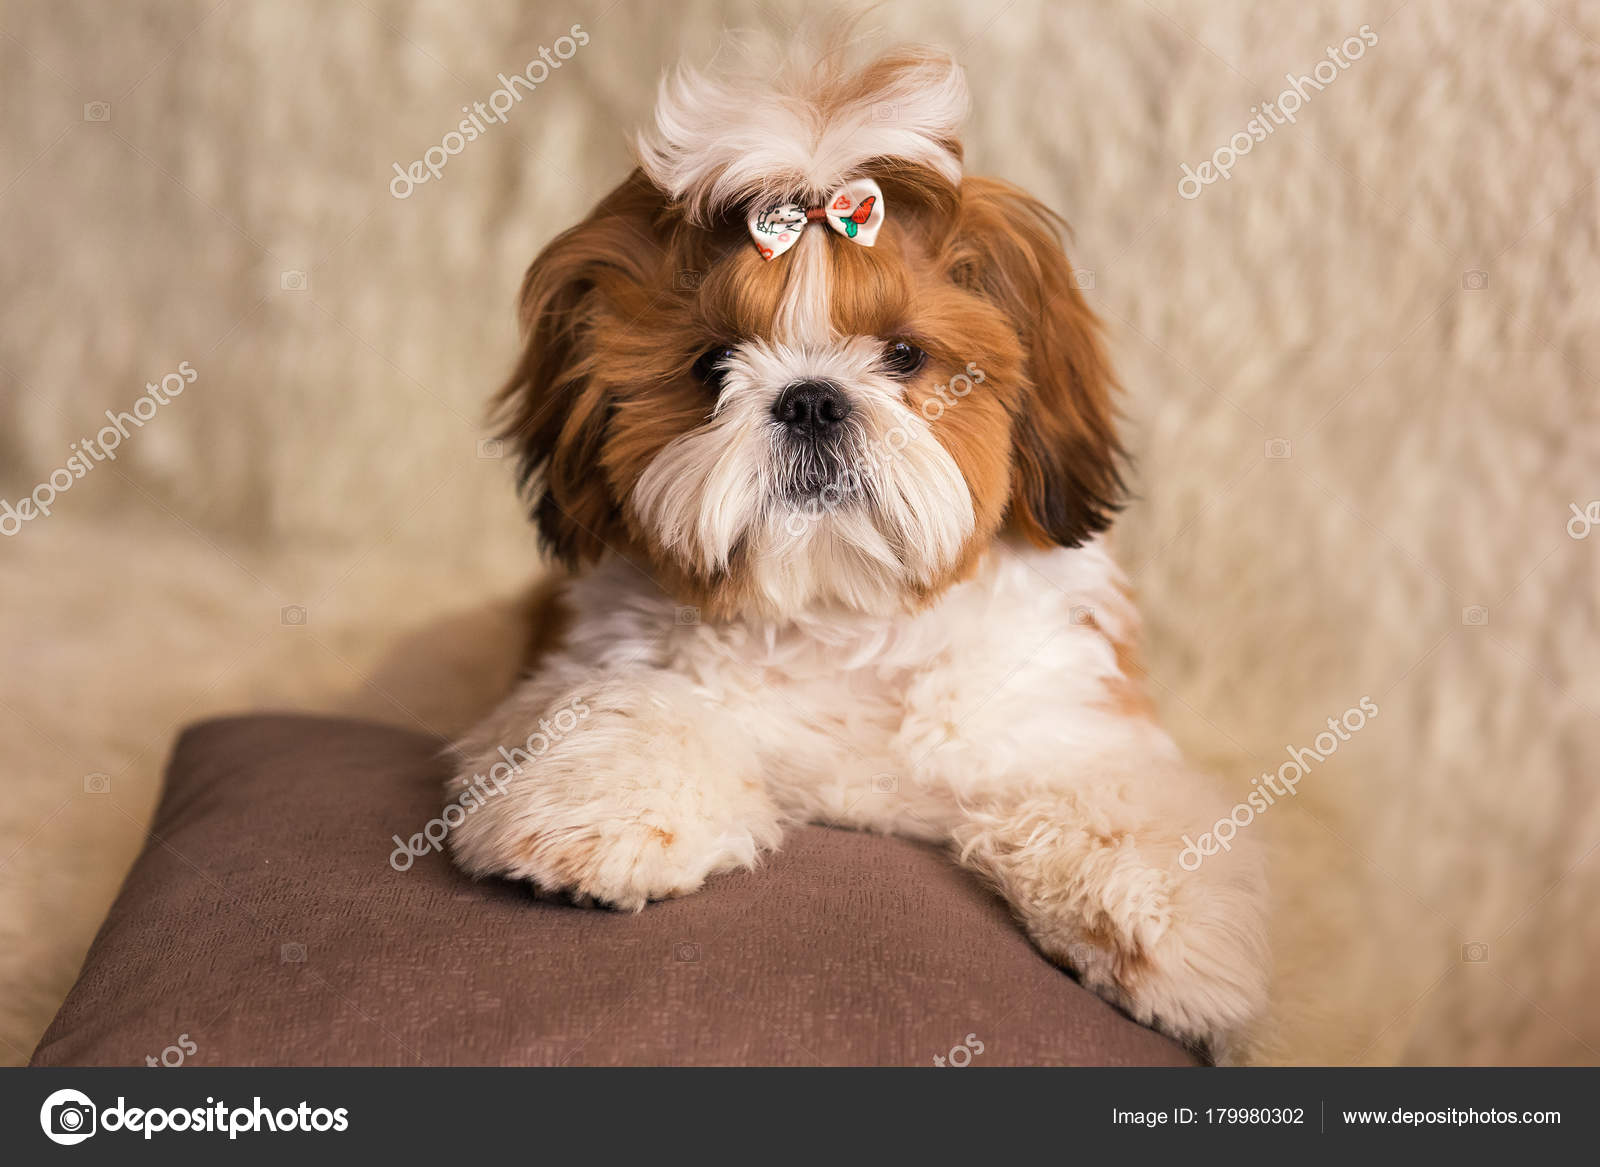 Portrait Cute Puppy Dog Shih Tzu Bow Lying Couch Home Stock Photo ...